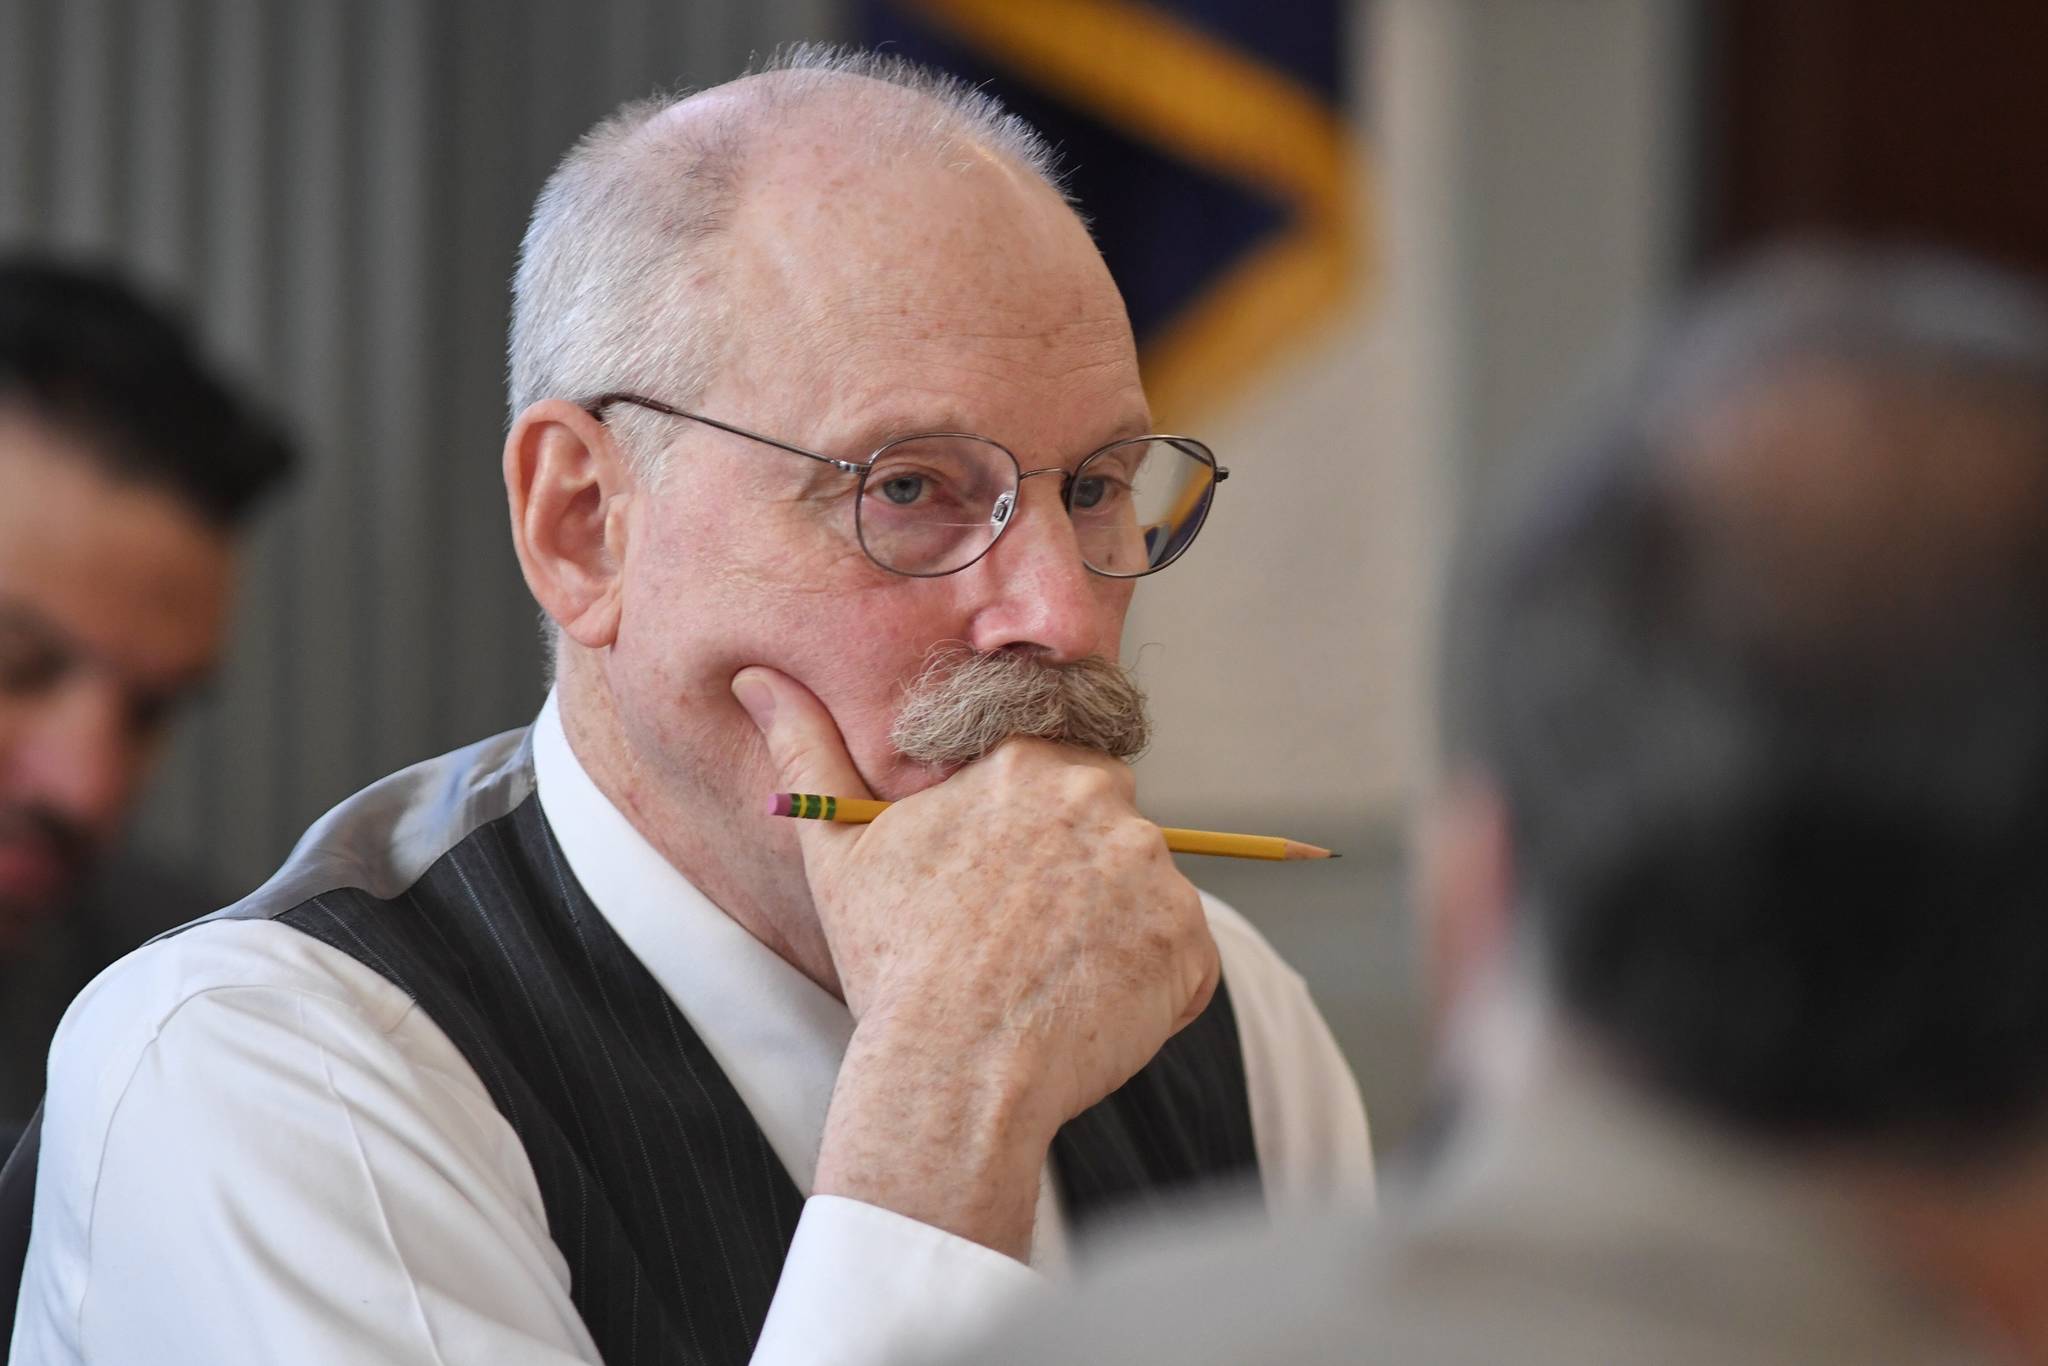 Sen. Bert Stedman, R-Sitka, listens to Finance Division Director David Teal answers questions from the Senate Finance Committee on the state’s budget at the Capitol on Thursday, April 25, 2019 in Juneau, Alaska. (Michael Penn | Juneau Empire File)